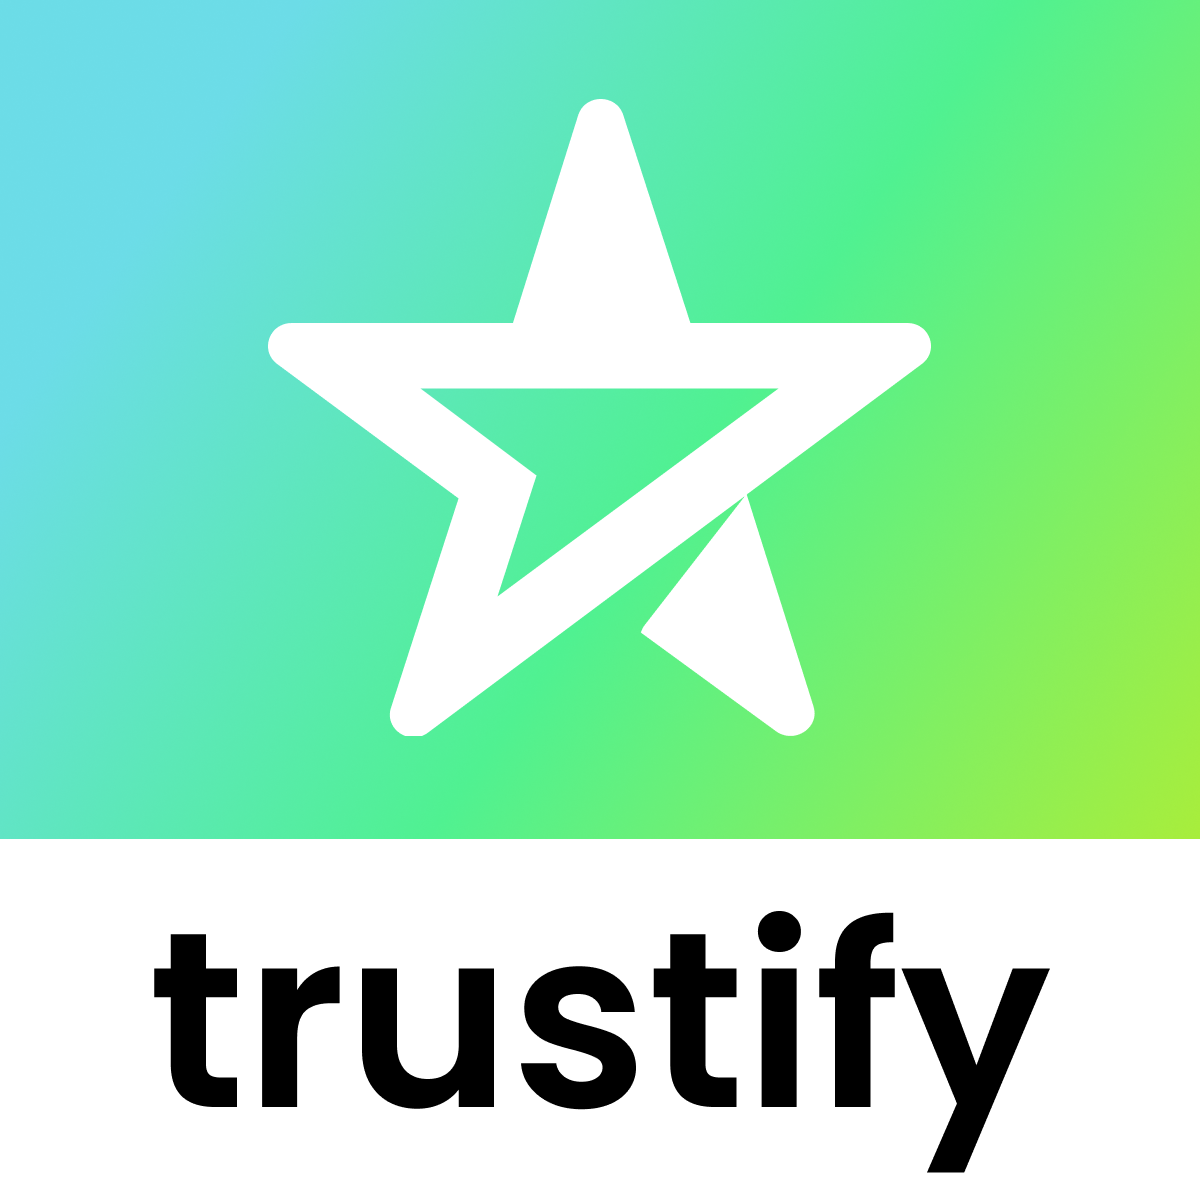 Trustify Product Reviews App